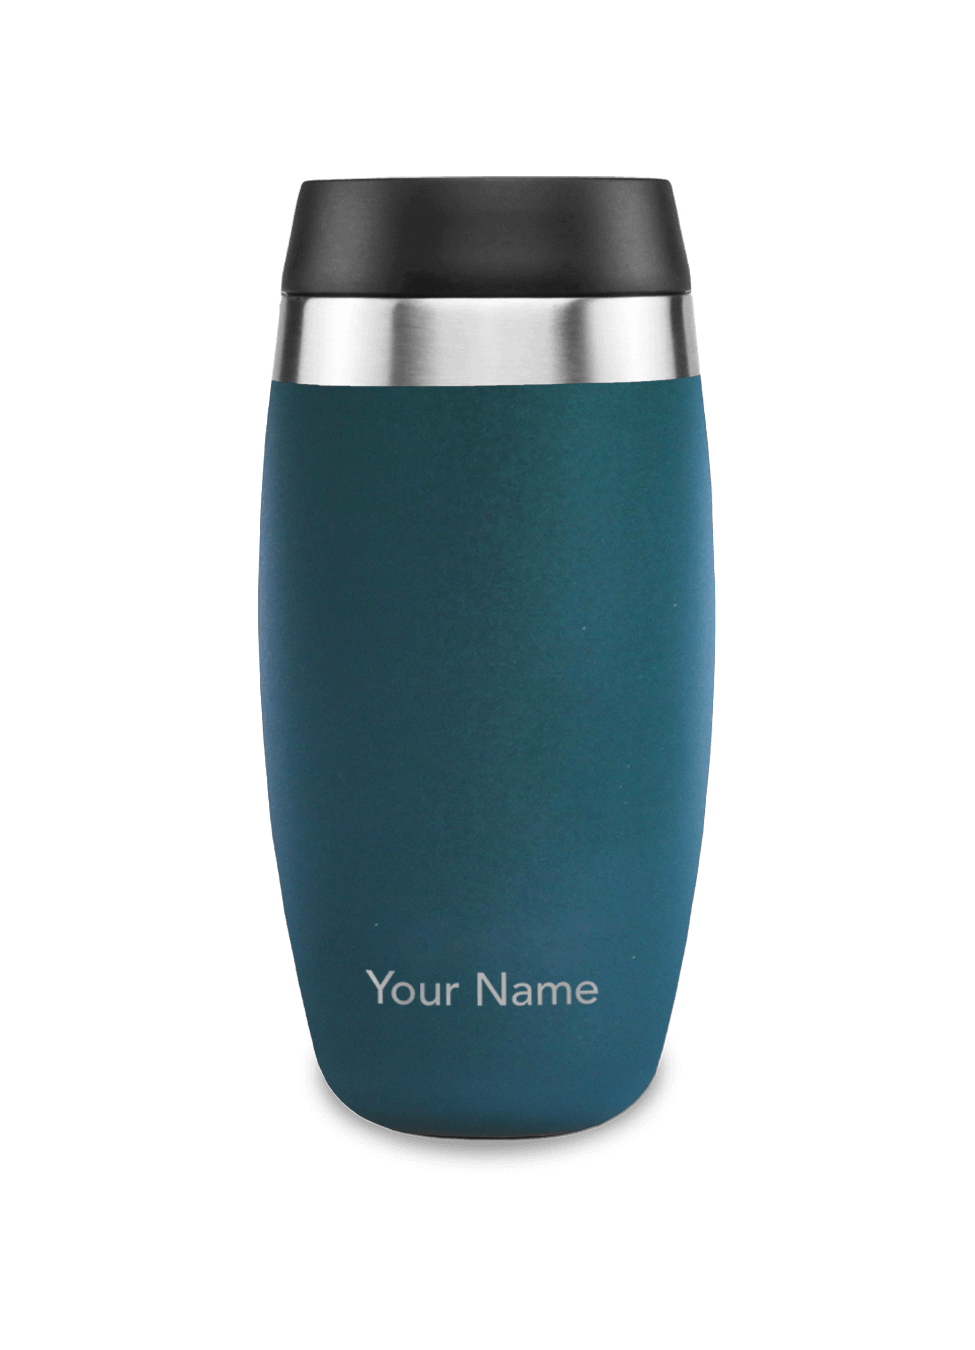 Personalised insulated reusable coffee cup in British racing green